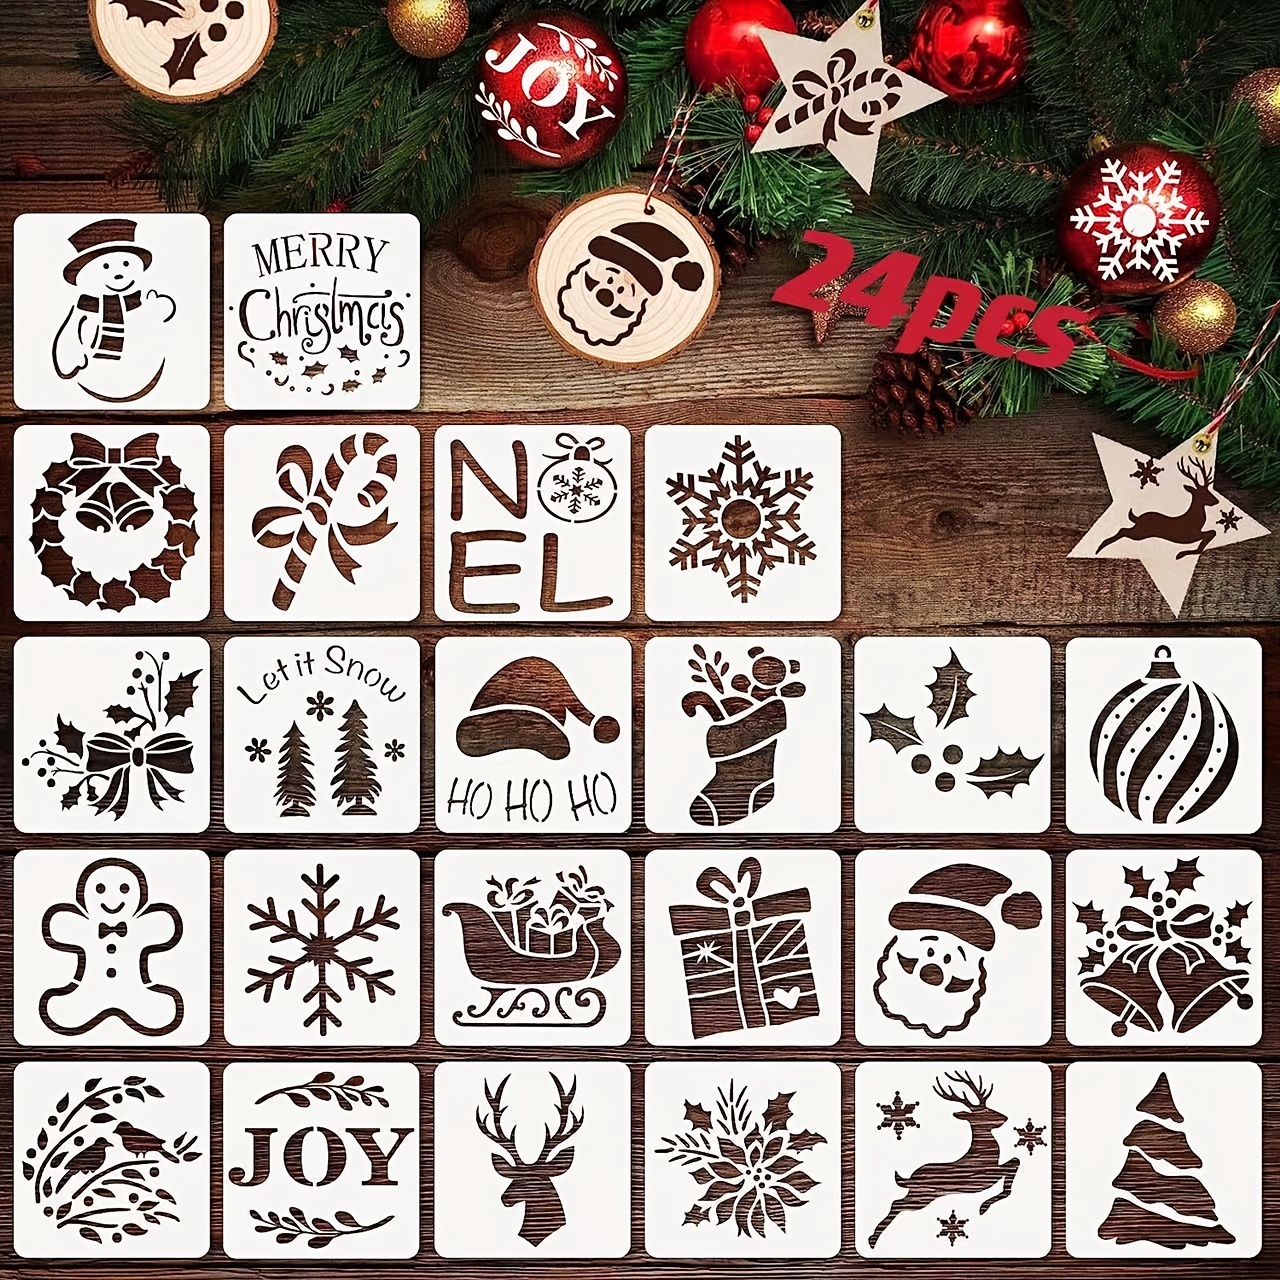 

24pcs Small Christmas Stencils 3x3inch/7.62x7.62cm For Painting On Wood Slice, Diy Christmas Ornaments